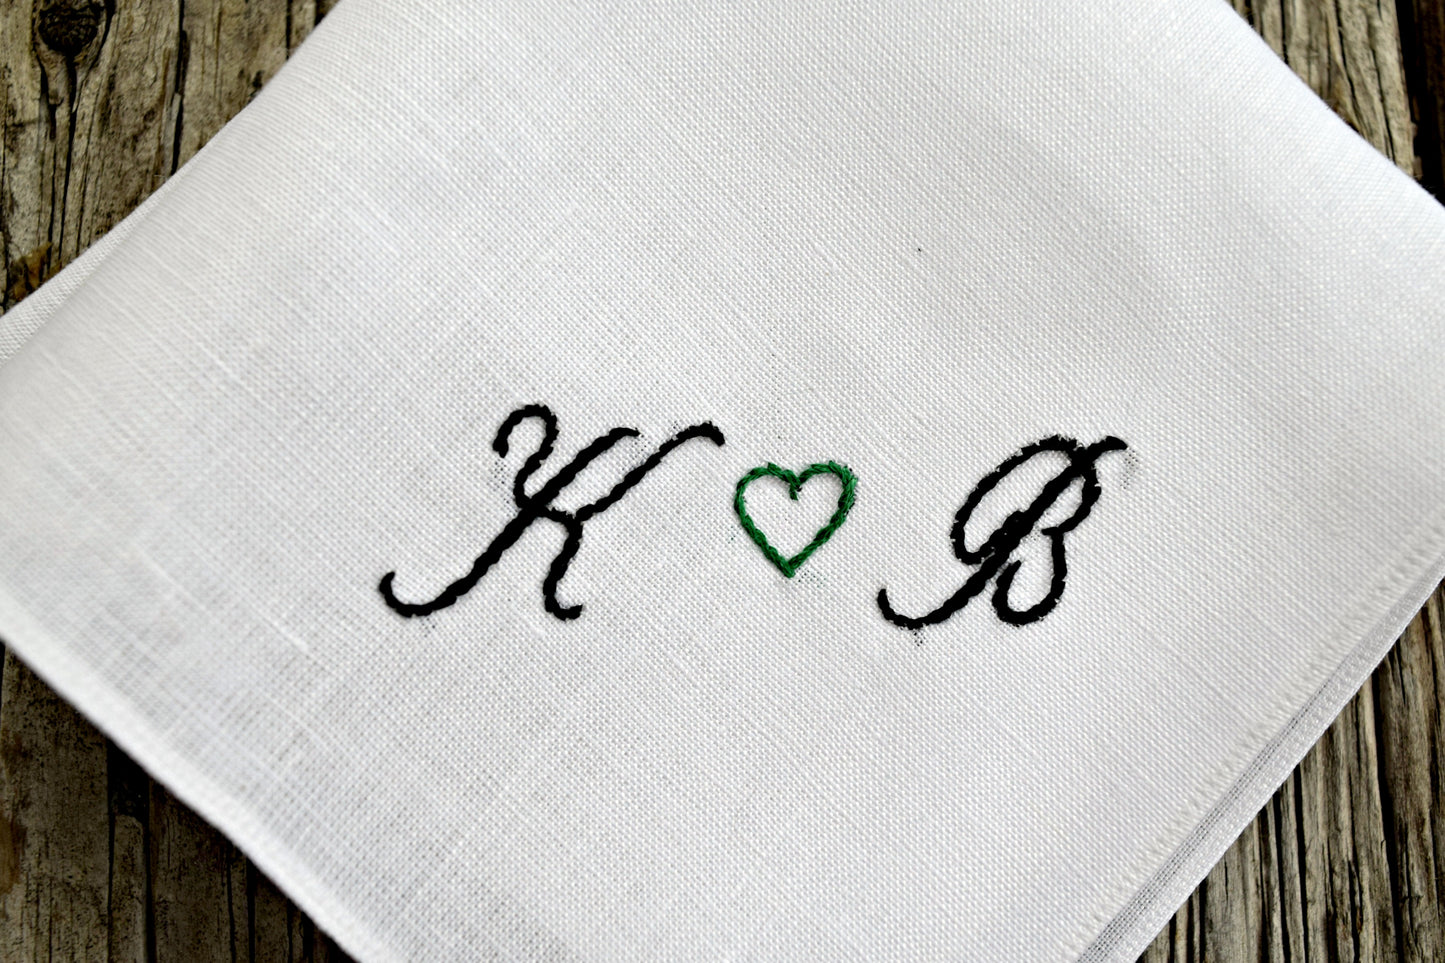 Sweetheart handkerchief embroidered with two initials and heart in black and green